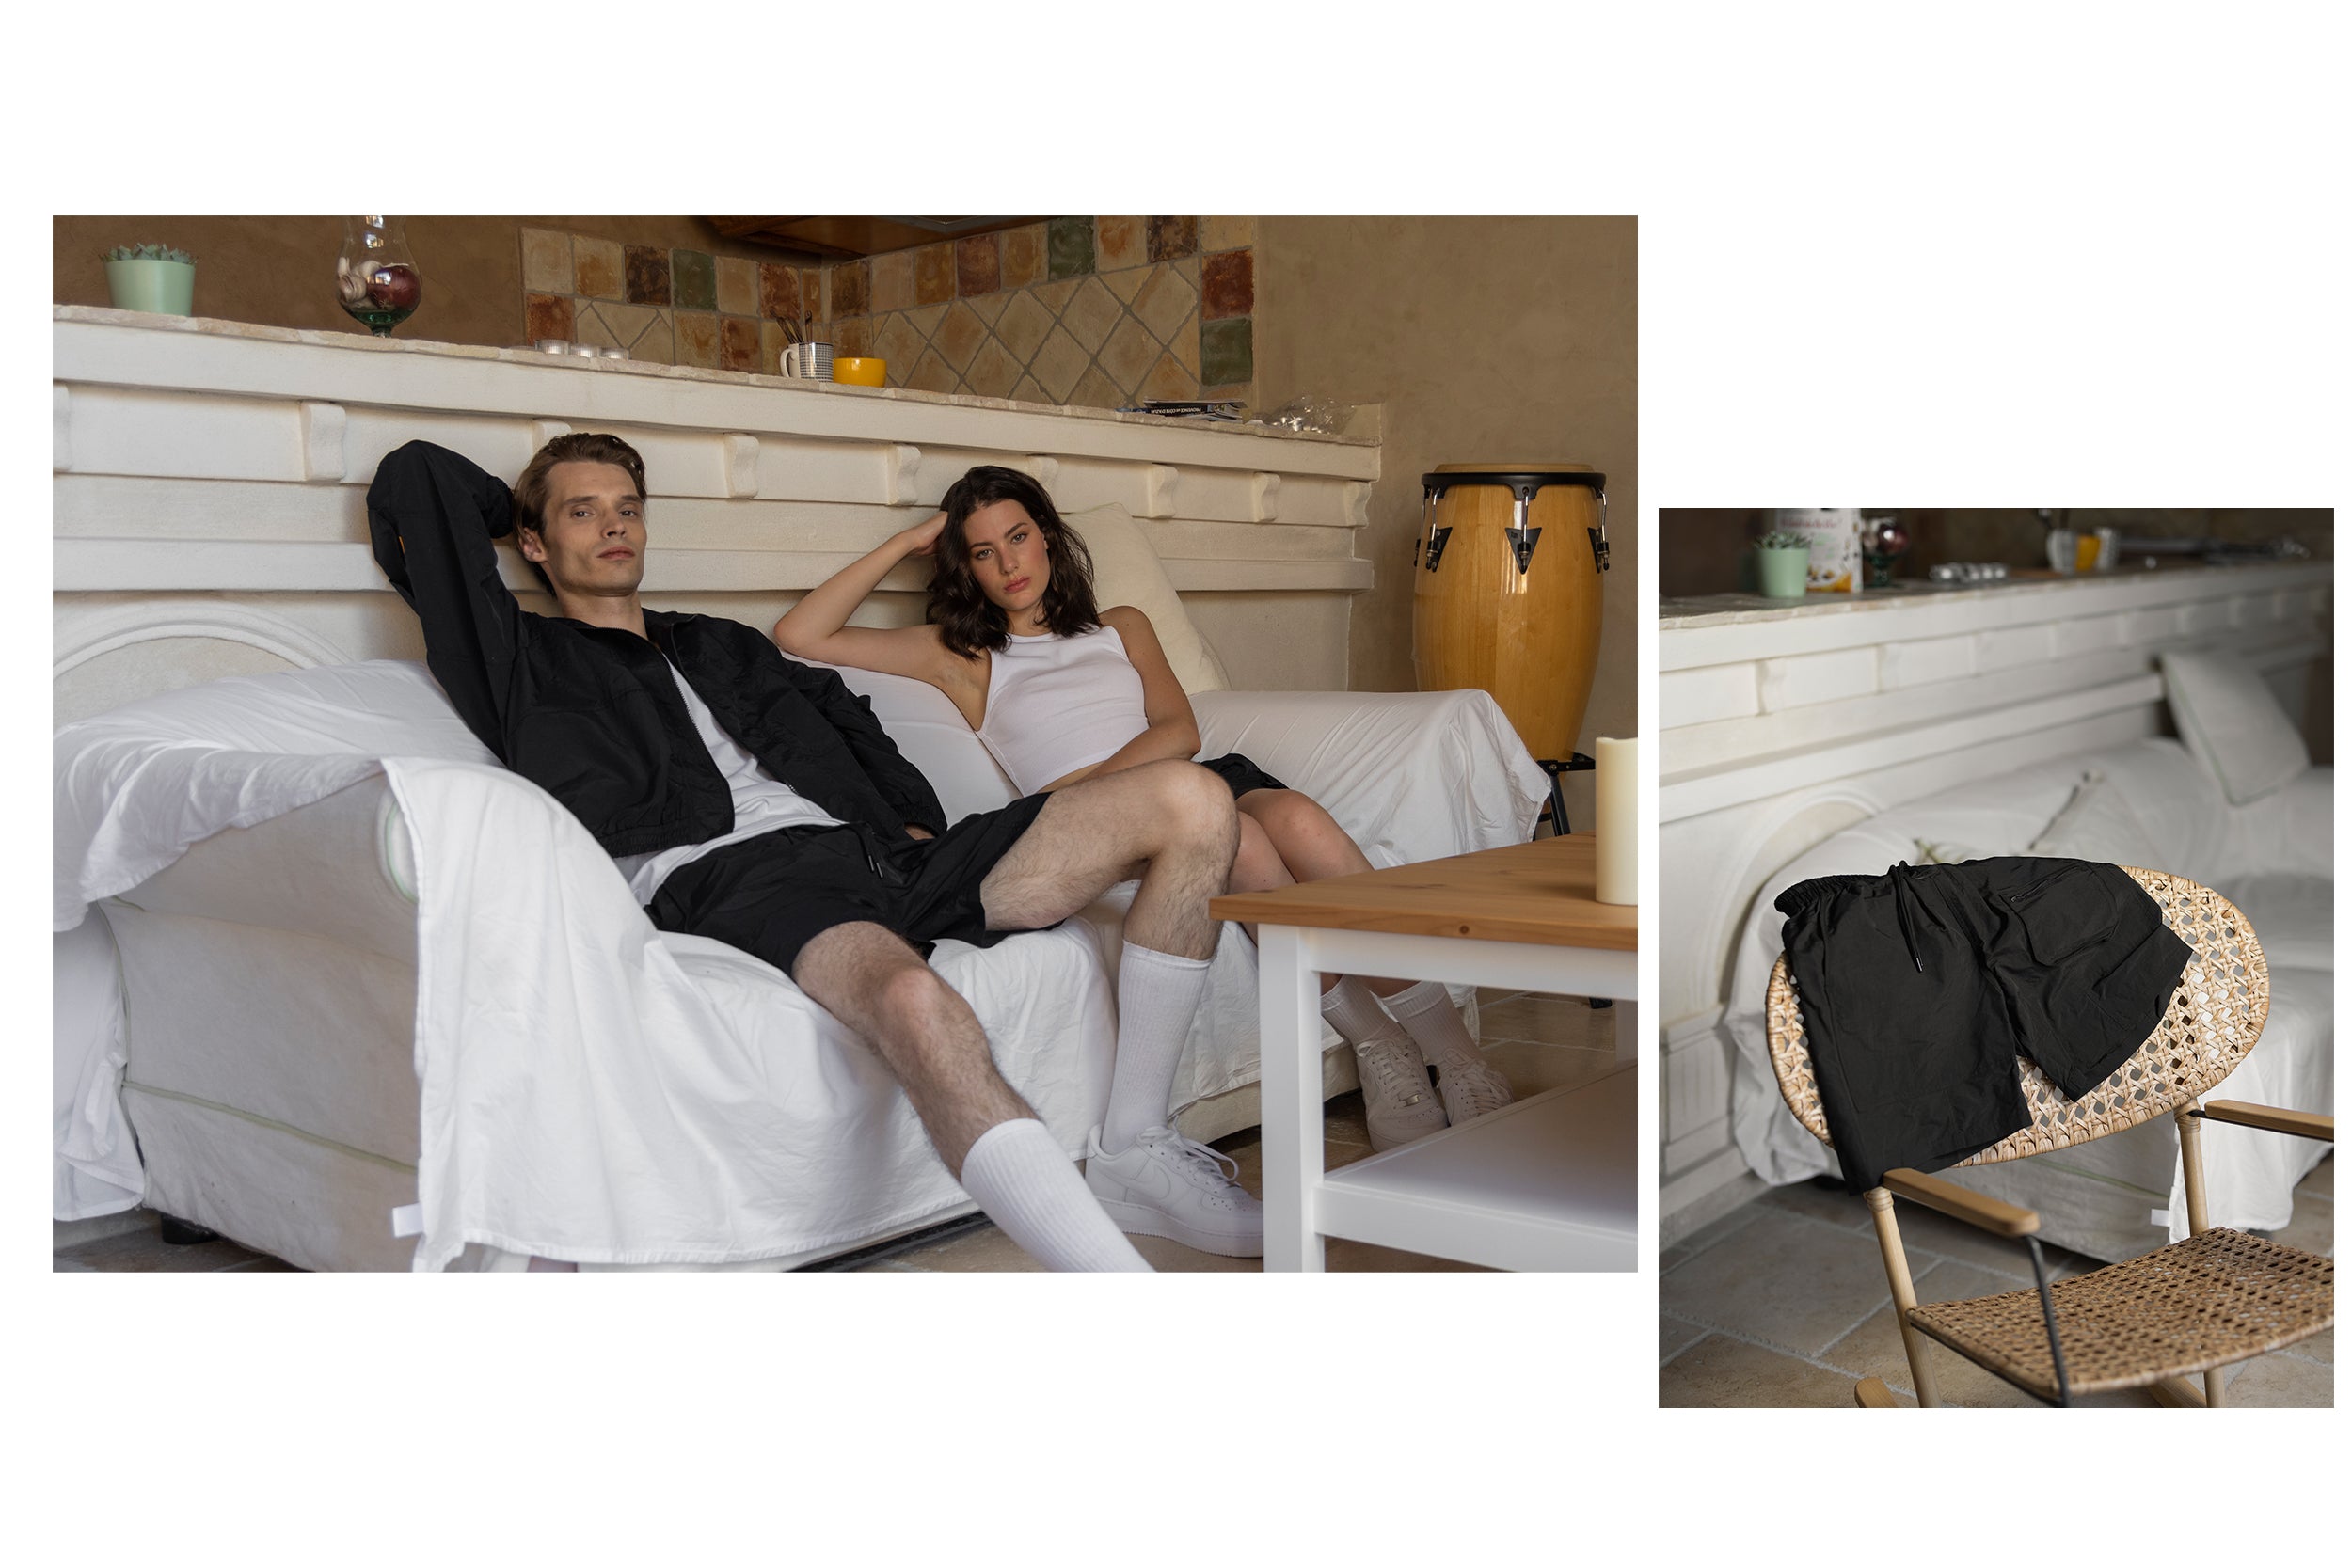 A male model wearing a black zip-up jacket and black cargo shorts is sitting on a sofa next to a female model wearing a white tank top and black cargo shorts.